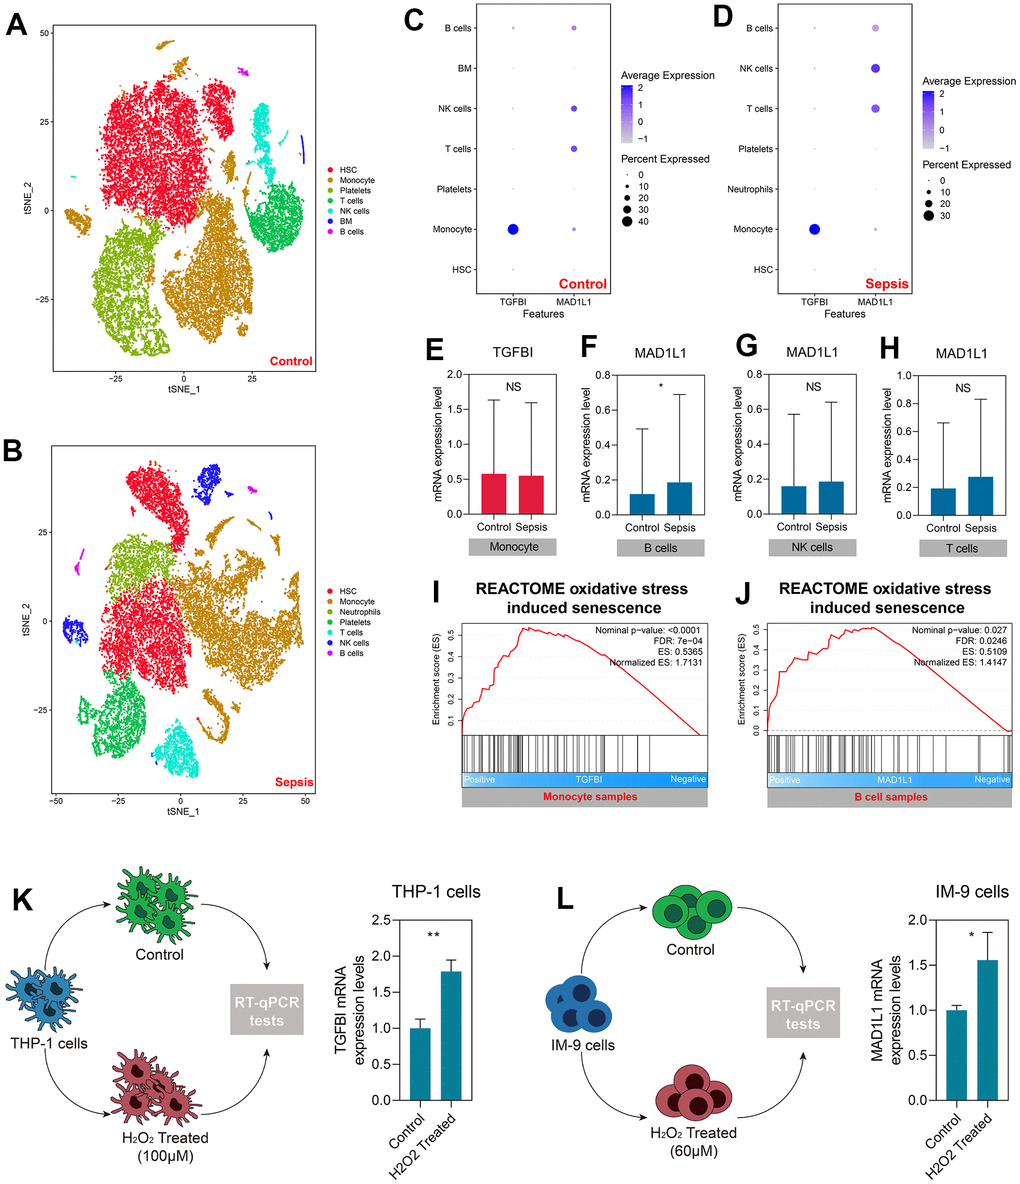 TGFBI and MAD1L1 were associated with monocyte and B cell senescence, respectively. (A, B) Clustering and cell type annotation of cells isolated from healthy control (A) and sepsis (B) subjects. (C, D) Levels of TGFBI and MAD1L in different cells isolated from control (C) and sepsis (D) subjects. (E–H) Levels of TGFBI in monocytes from control and sepsis subjects (E), and levels of MAD1L1 in B cells (F), NK cells (G), and T cells (H) from control and sepsis subjects. (I, J) Positive association between TGFBI with oxidative stress-induced senescence in monocytes (I), and MAD1L with oxidative stress-induced senescence in B cells (J). (K, L) Up-regulation of TGFBI in THP-1 cells treated with H2O2 (K), and up-regulation of MAD1L1 in IM-9 cells treated with H2O2 (L). Abbreviations: scRNA-seq: single-cell RNA sequencing; *P 